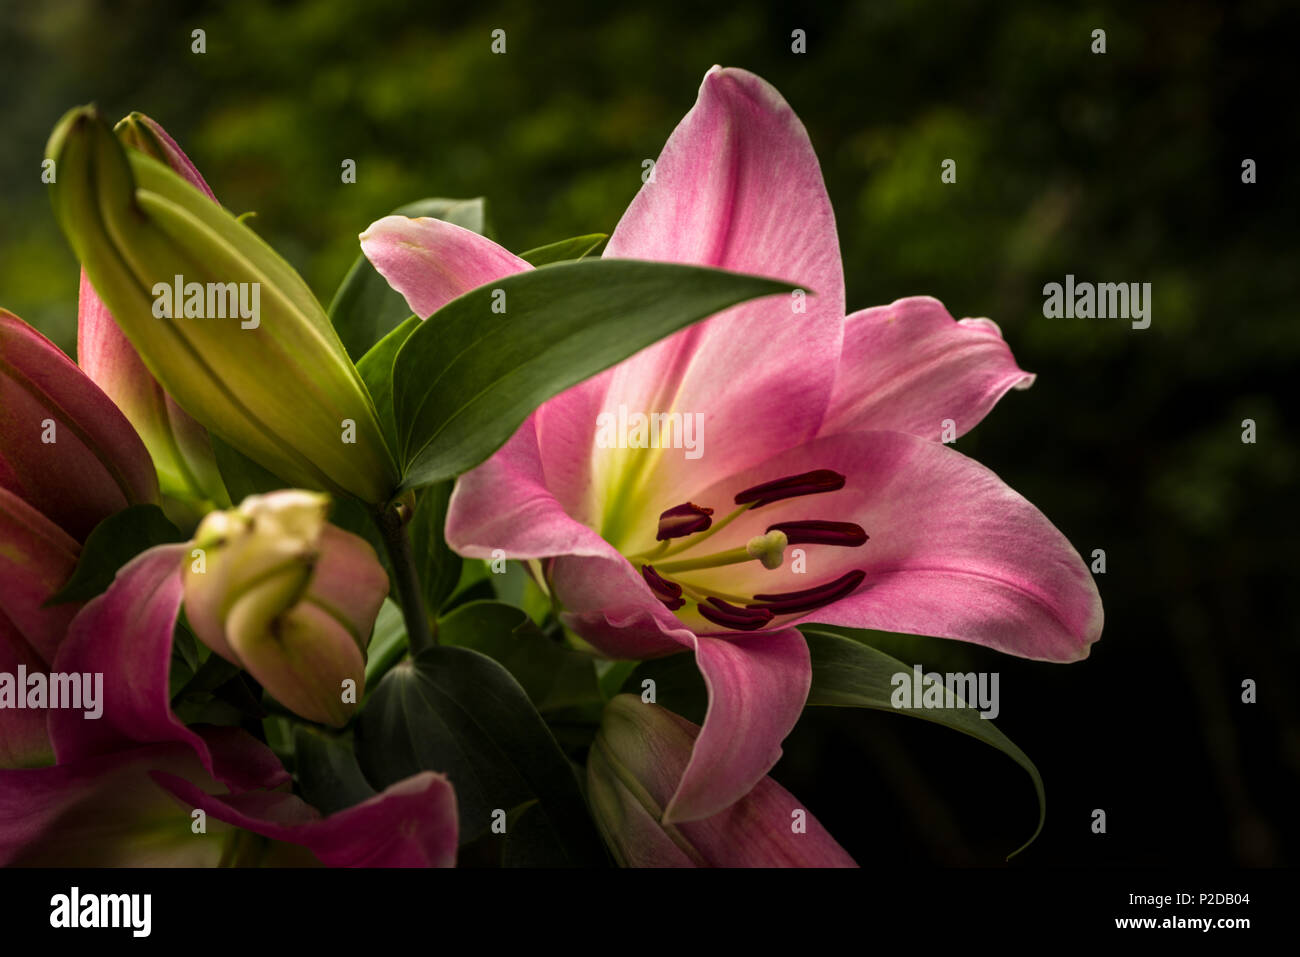 Huge Asian Lily also called Pink Asiatic Lily Stock Photo